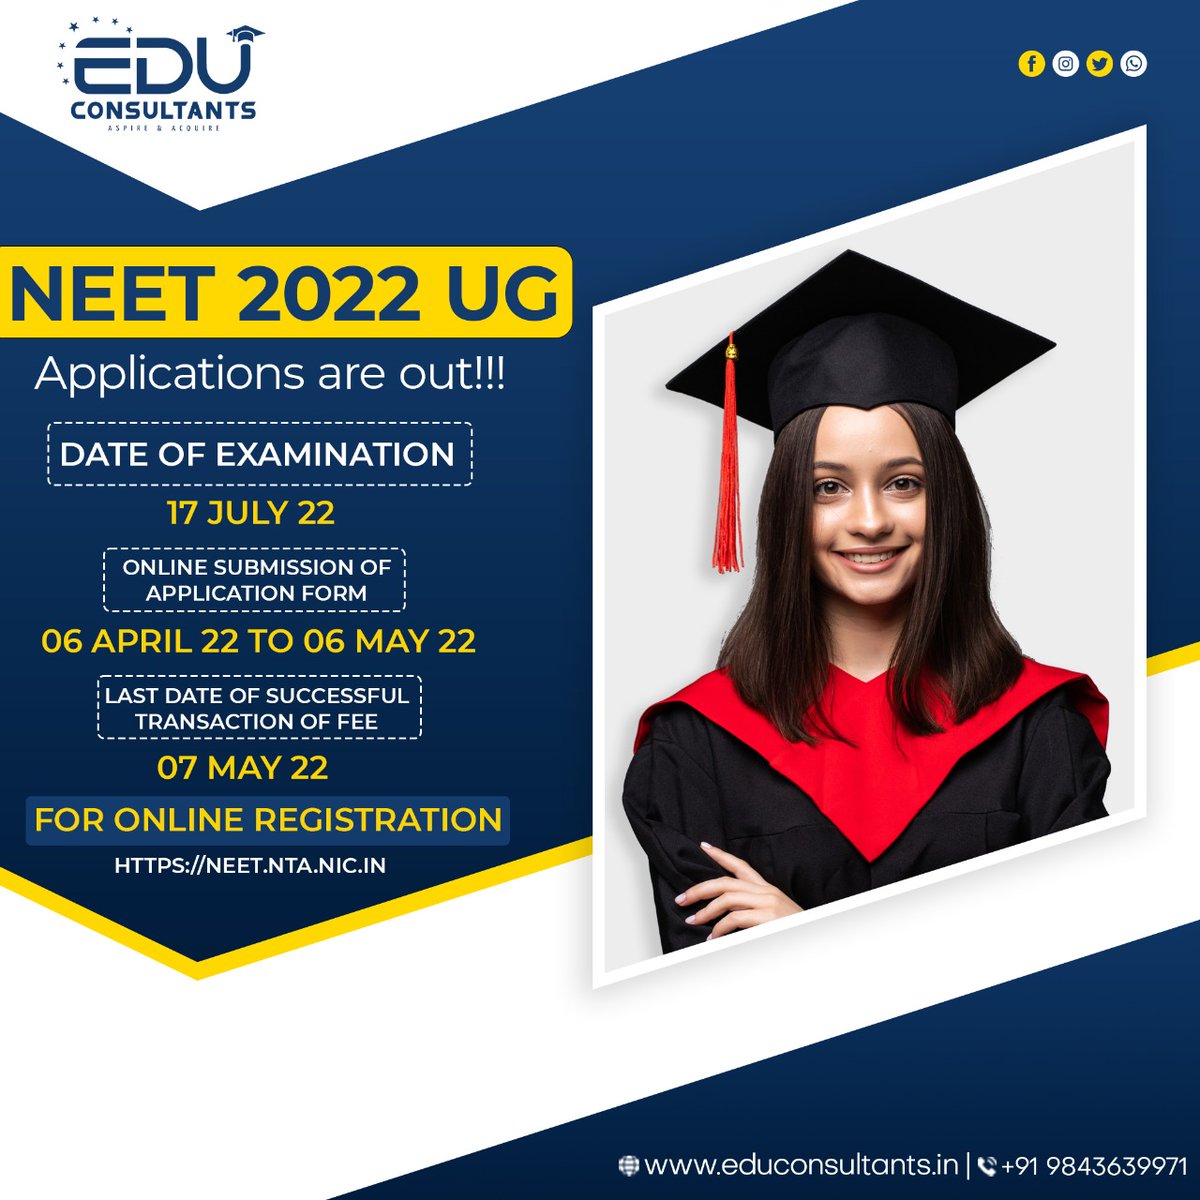 Excellent news for NEET aspirants!!! Candidates who are eagerly anticipating the NEET Exam can now apply
Contact us: 9843639971
#educonsultant #neetexam #neet #aiims #mbbs #neetapplication  #medical #doctor #neetpreparatio #neetcoaching #cbse  #doctors  #jipmer #pondicherry